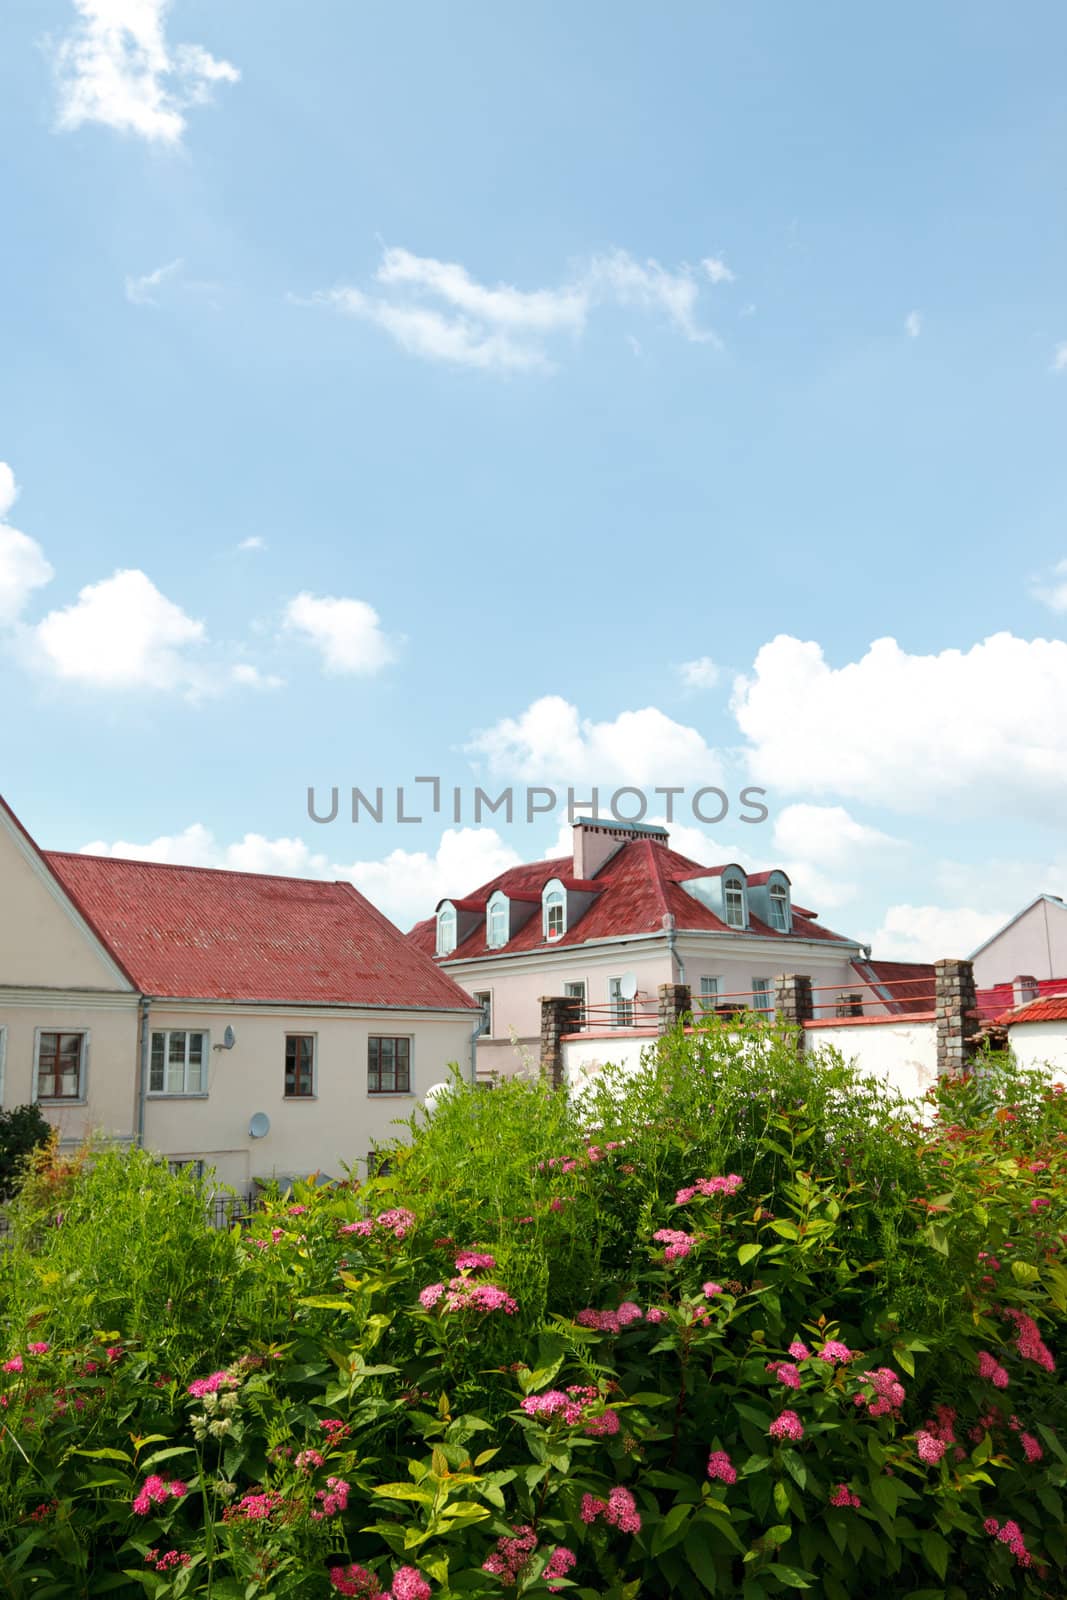 landscape with red roofs, flowers and blue sky